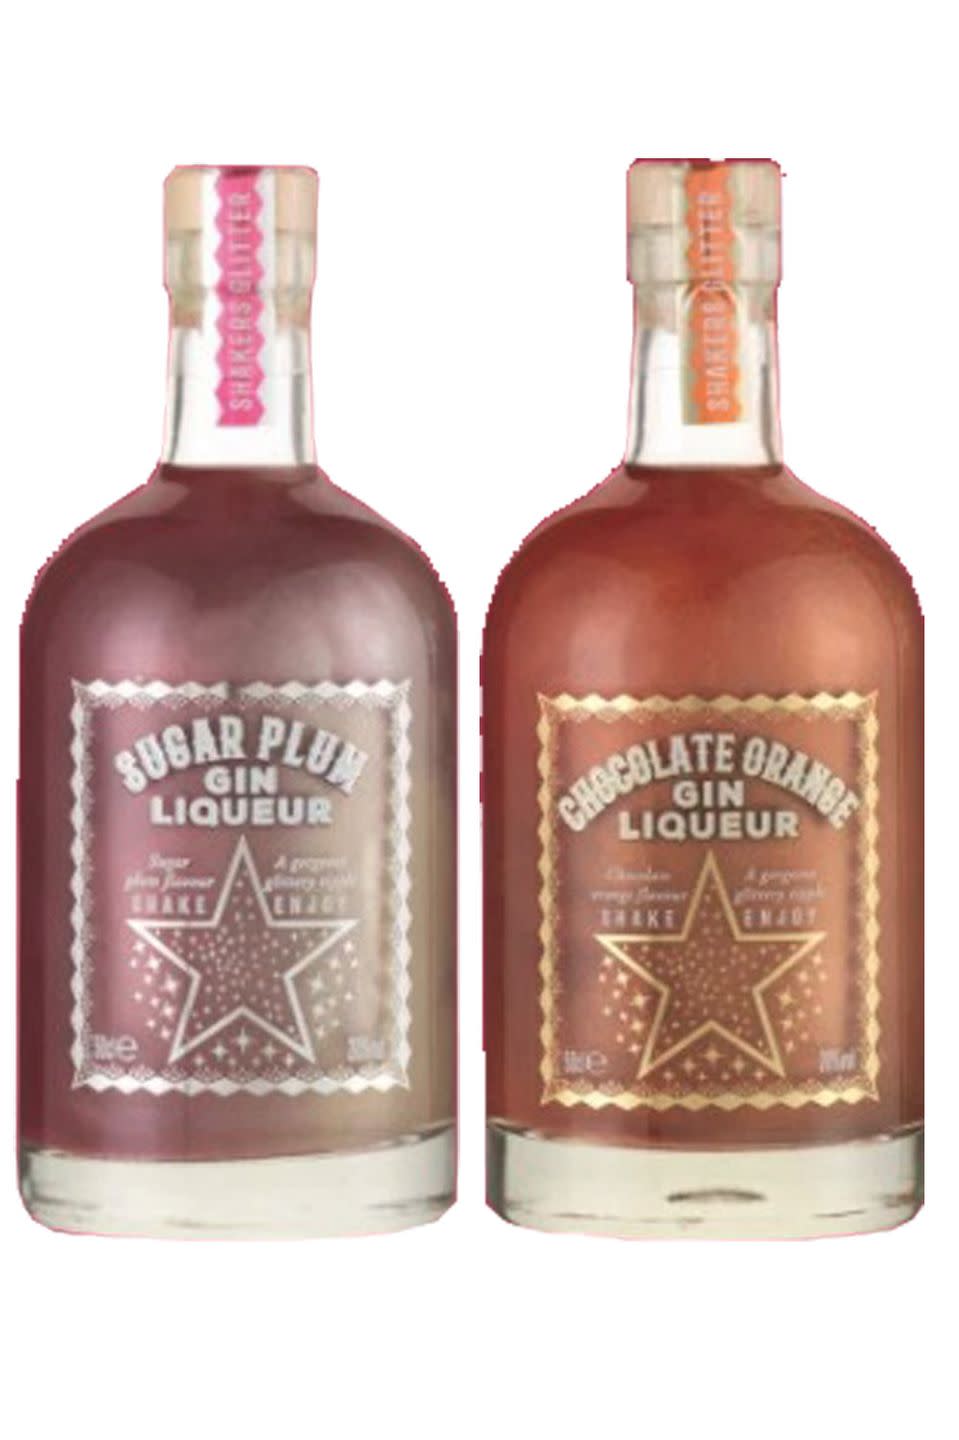 <p>If your drinks cabinet isn't already stuffed with gin ahead of the festive season, Sainsbury's have got two new offerings you might want to get hold of - a Sugar Plum gin liqueur and a Chocolate Orange gin liqueur. The sugar plum is said to have a sweet and sugary taste, while the orange gives off hints of citrus and cocoa. Move over Baileys, eh? Both bottles of gin liqueur come in 50cl bottles with a 20% abv.</p><p>Release date tbc - watch this space!</p>